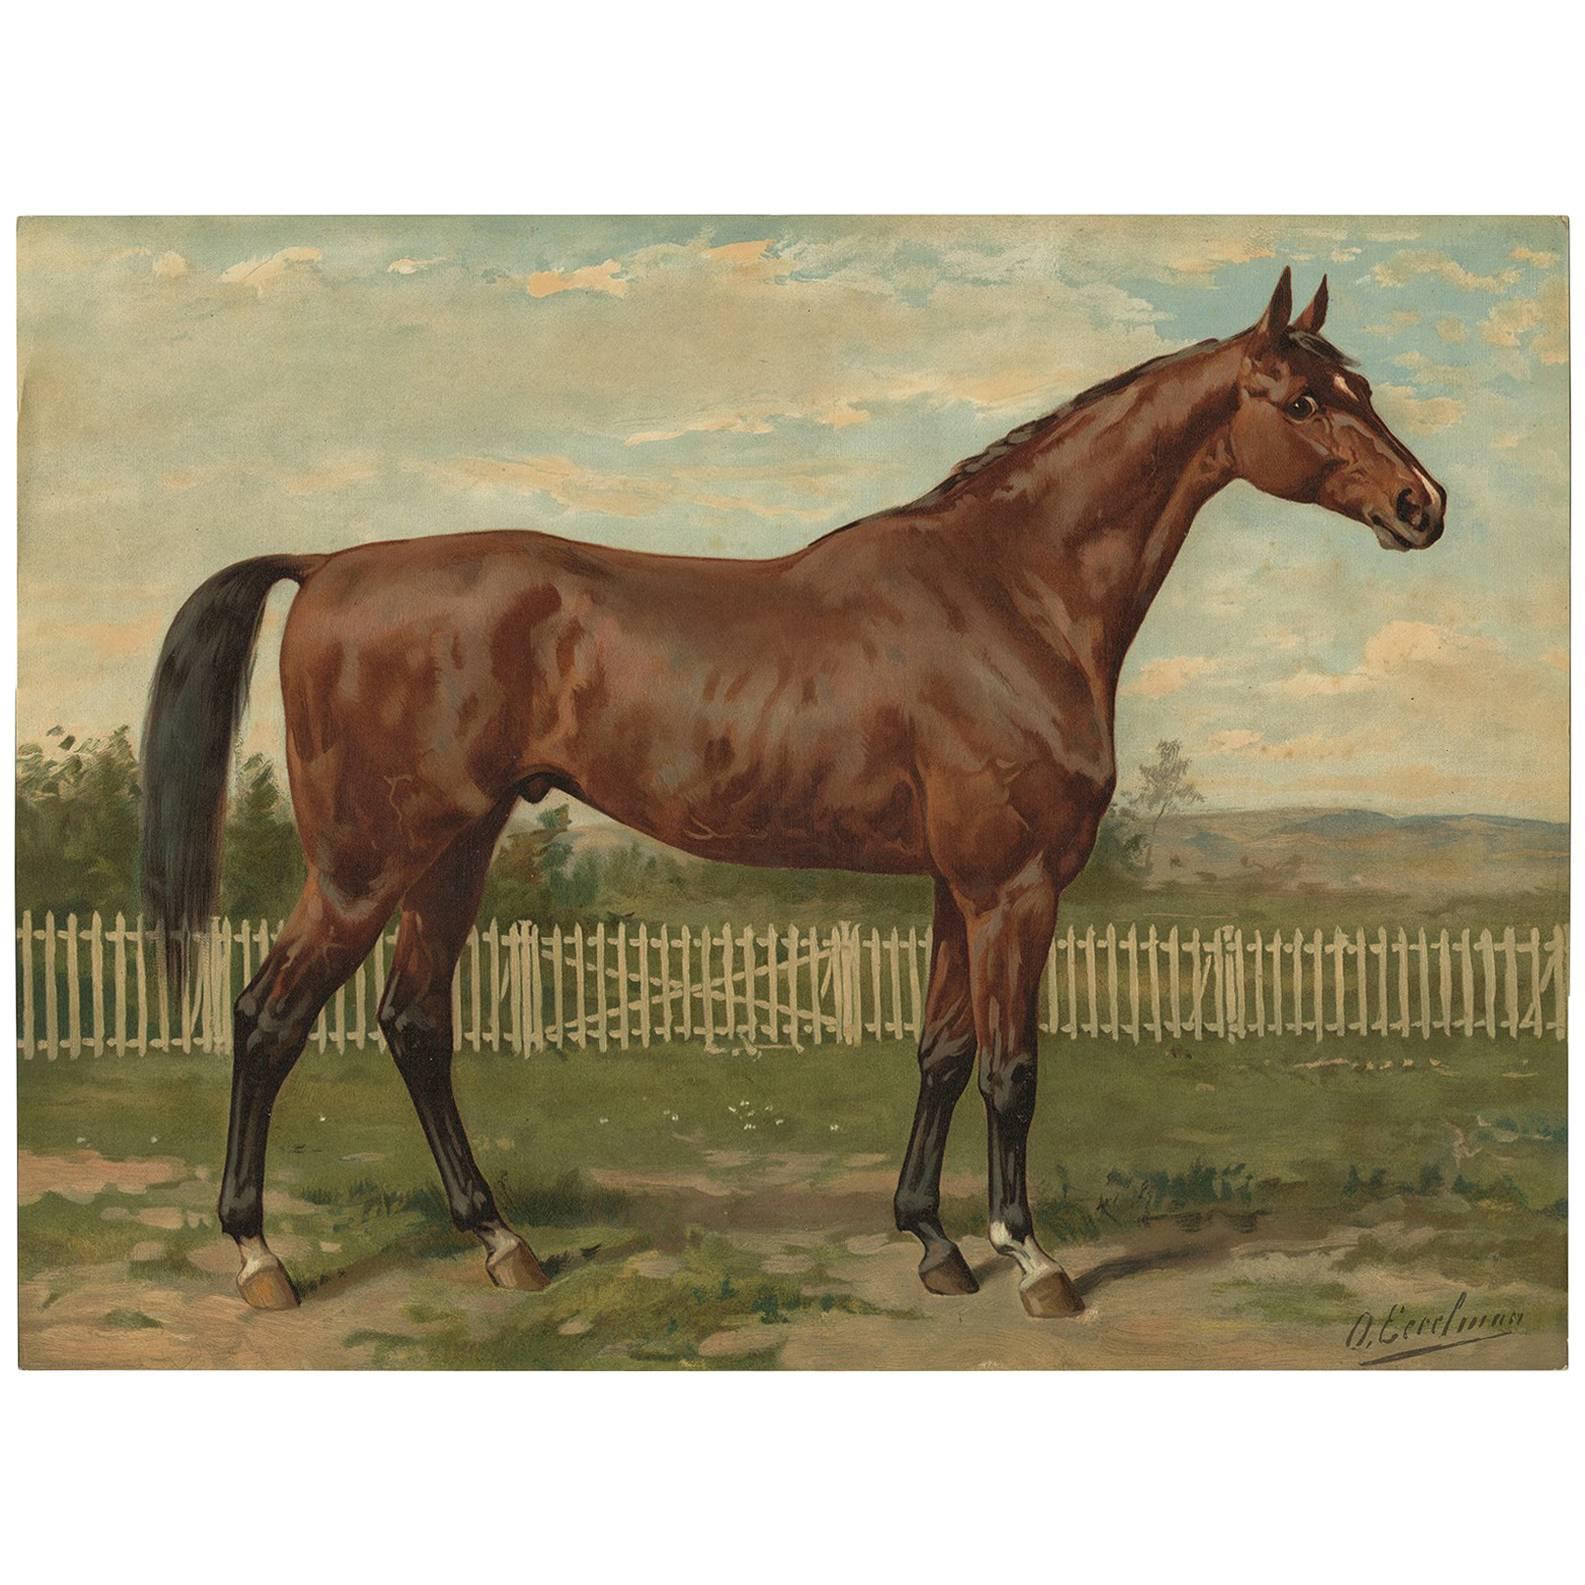 Antique Horse Print of an English Thoroughbred by O. Eerelman, 1898